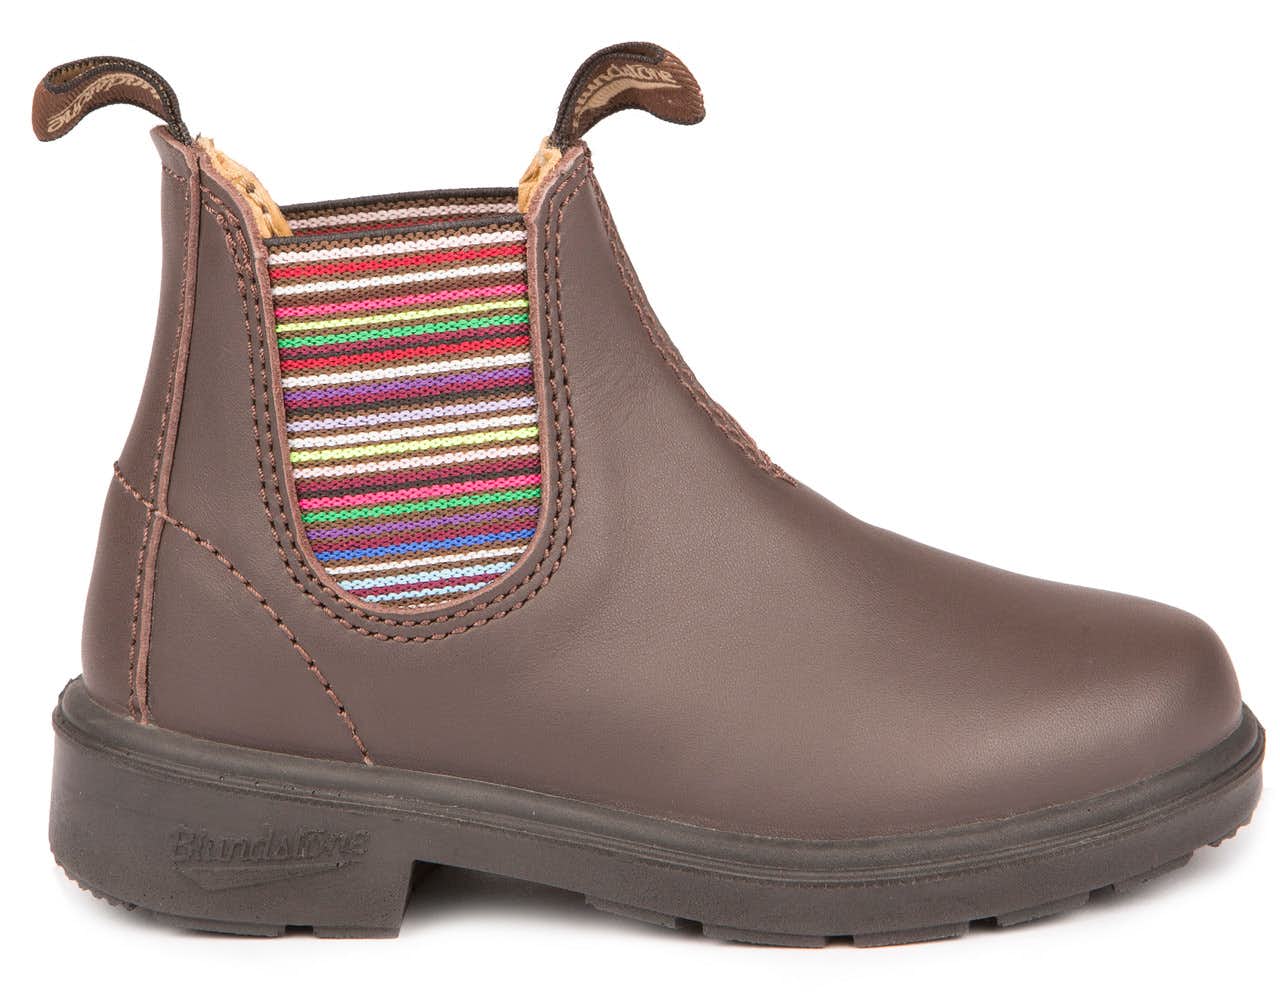 1413 Kid's Boots Brown with Stripes